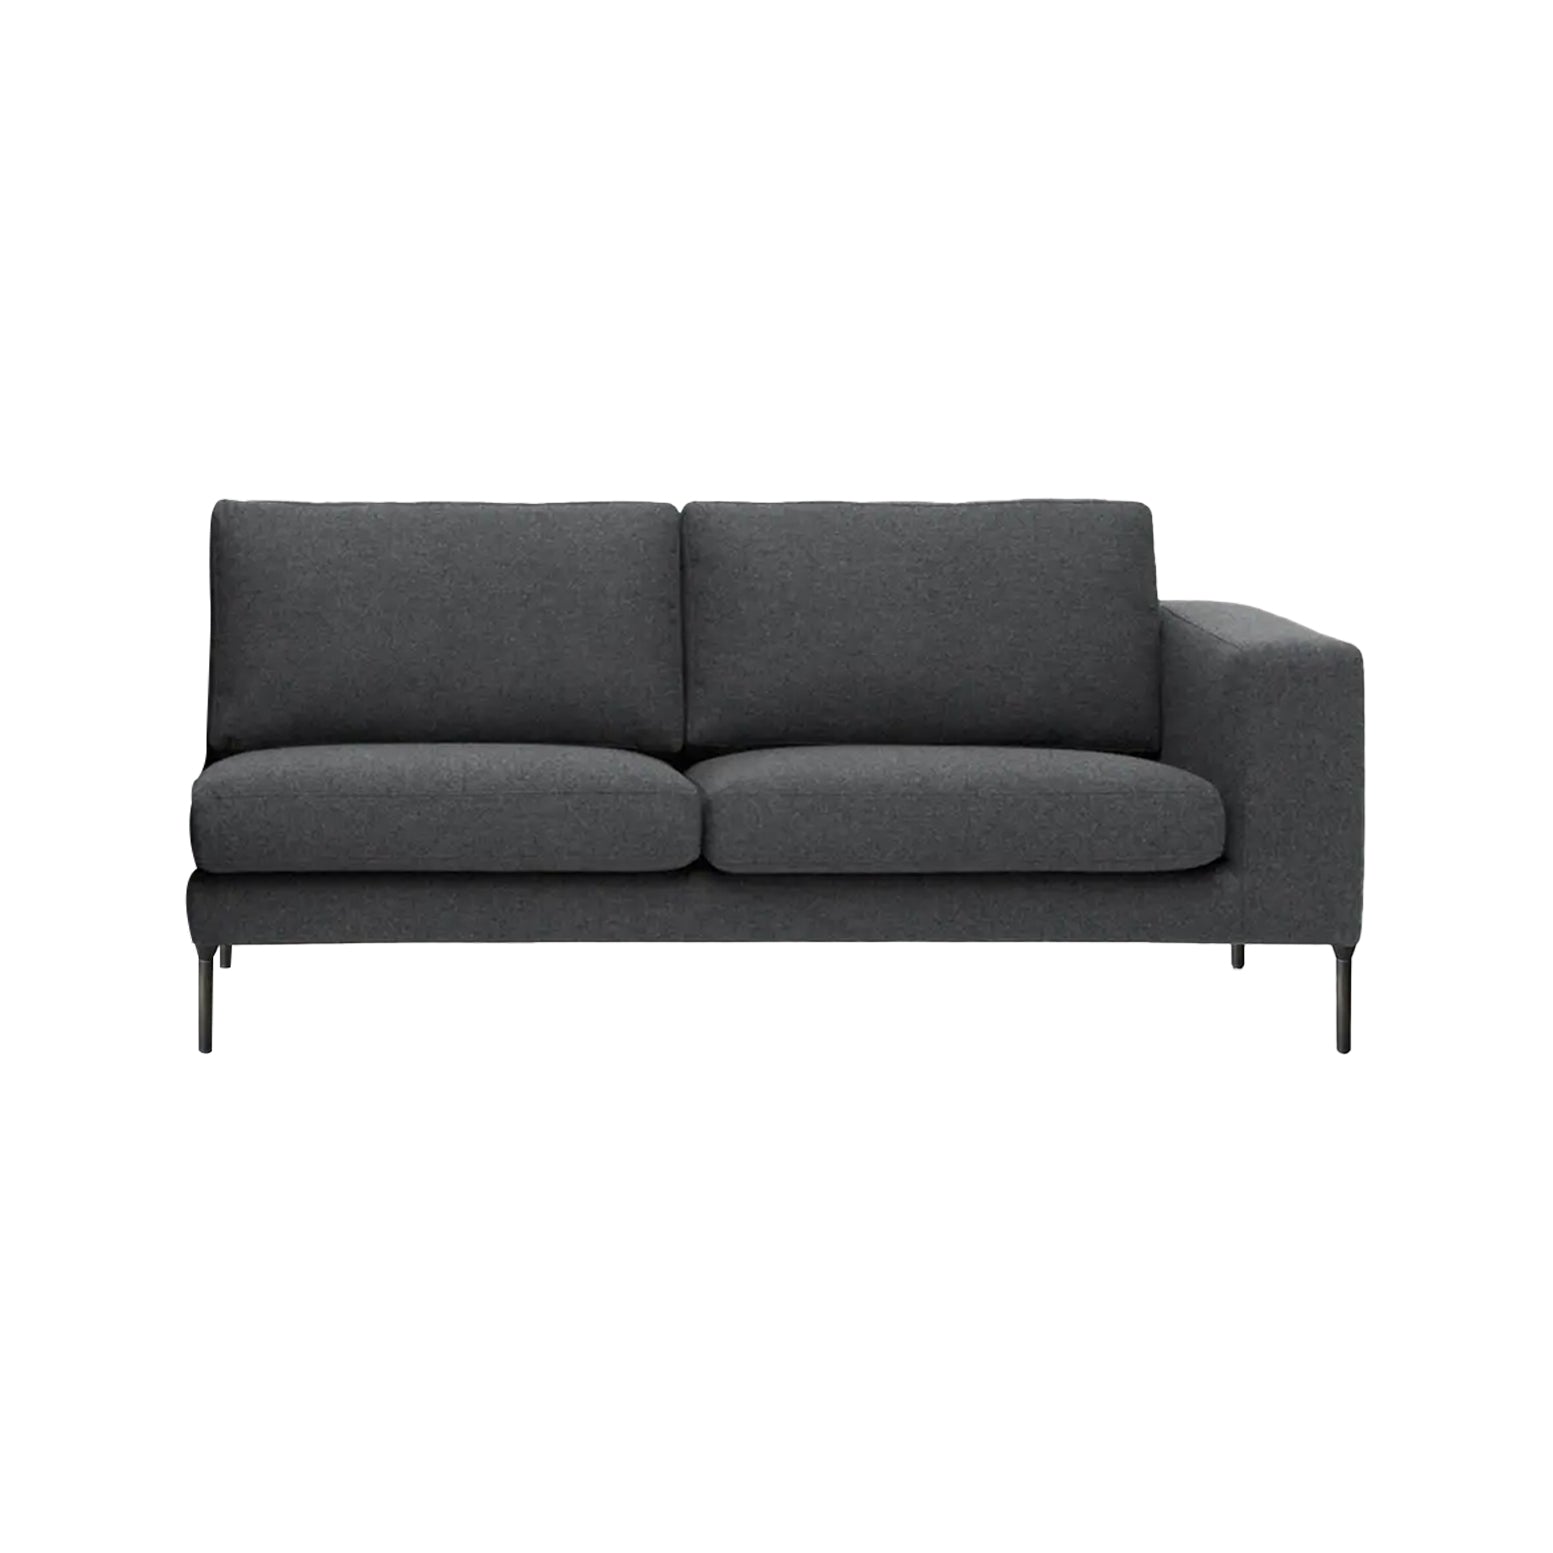 Neo Sectional Sofa: 2 Seater + Right + Sectional Piece - Black Nickel